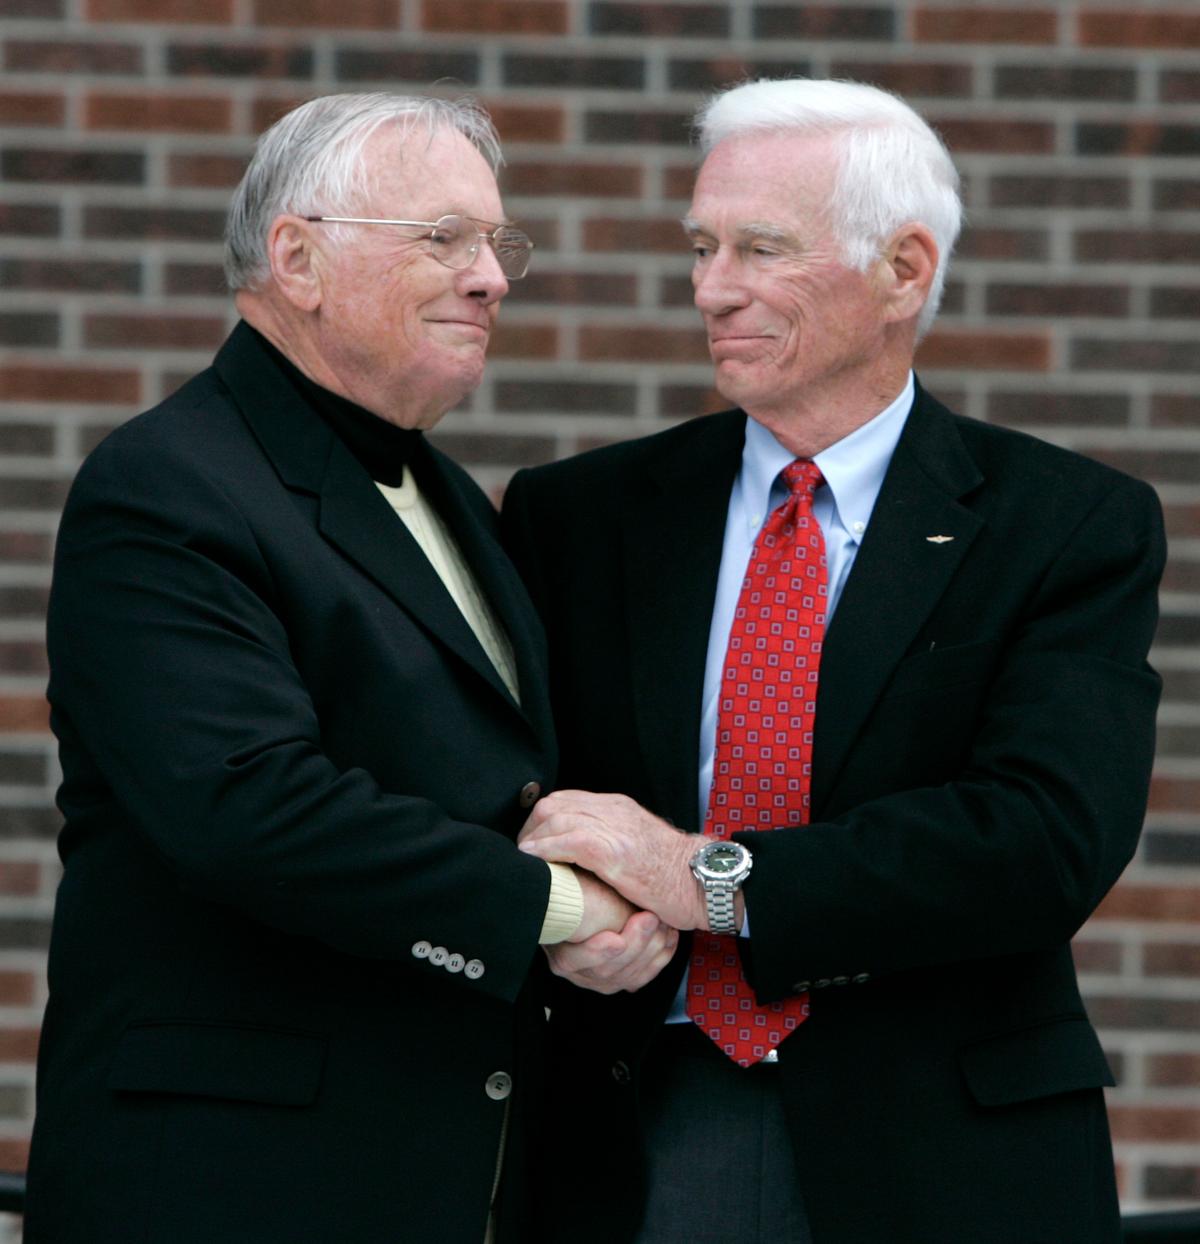 Former astronaut Neil Armstrong (L) is congratulated by fellow ex-astronaut Gene Cernan following the dedication ceremony of the Neil Armstrong Hall of Engineering at Purdue University in West Lafayette, Ind. (AP Photo/Michael Conroy)